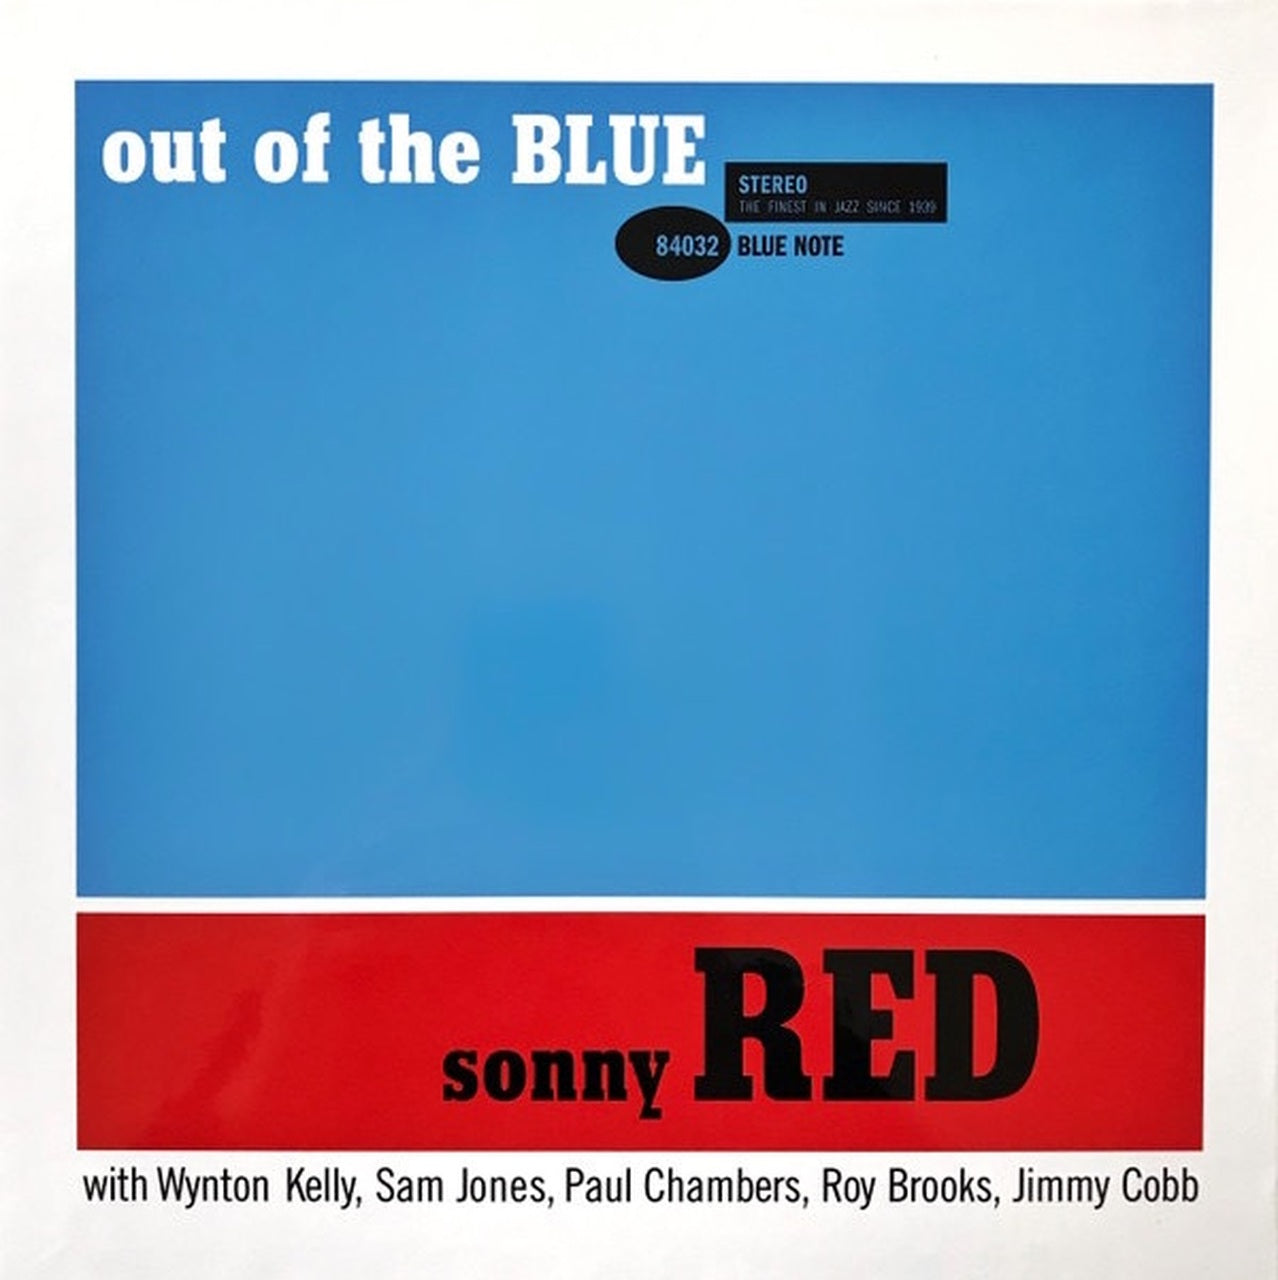 Sonny Red - Out of the Blue (Vinyl LP)